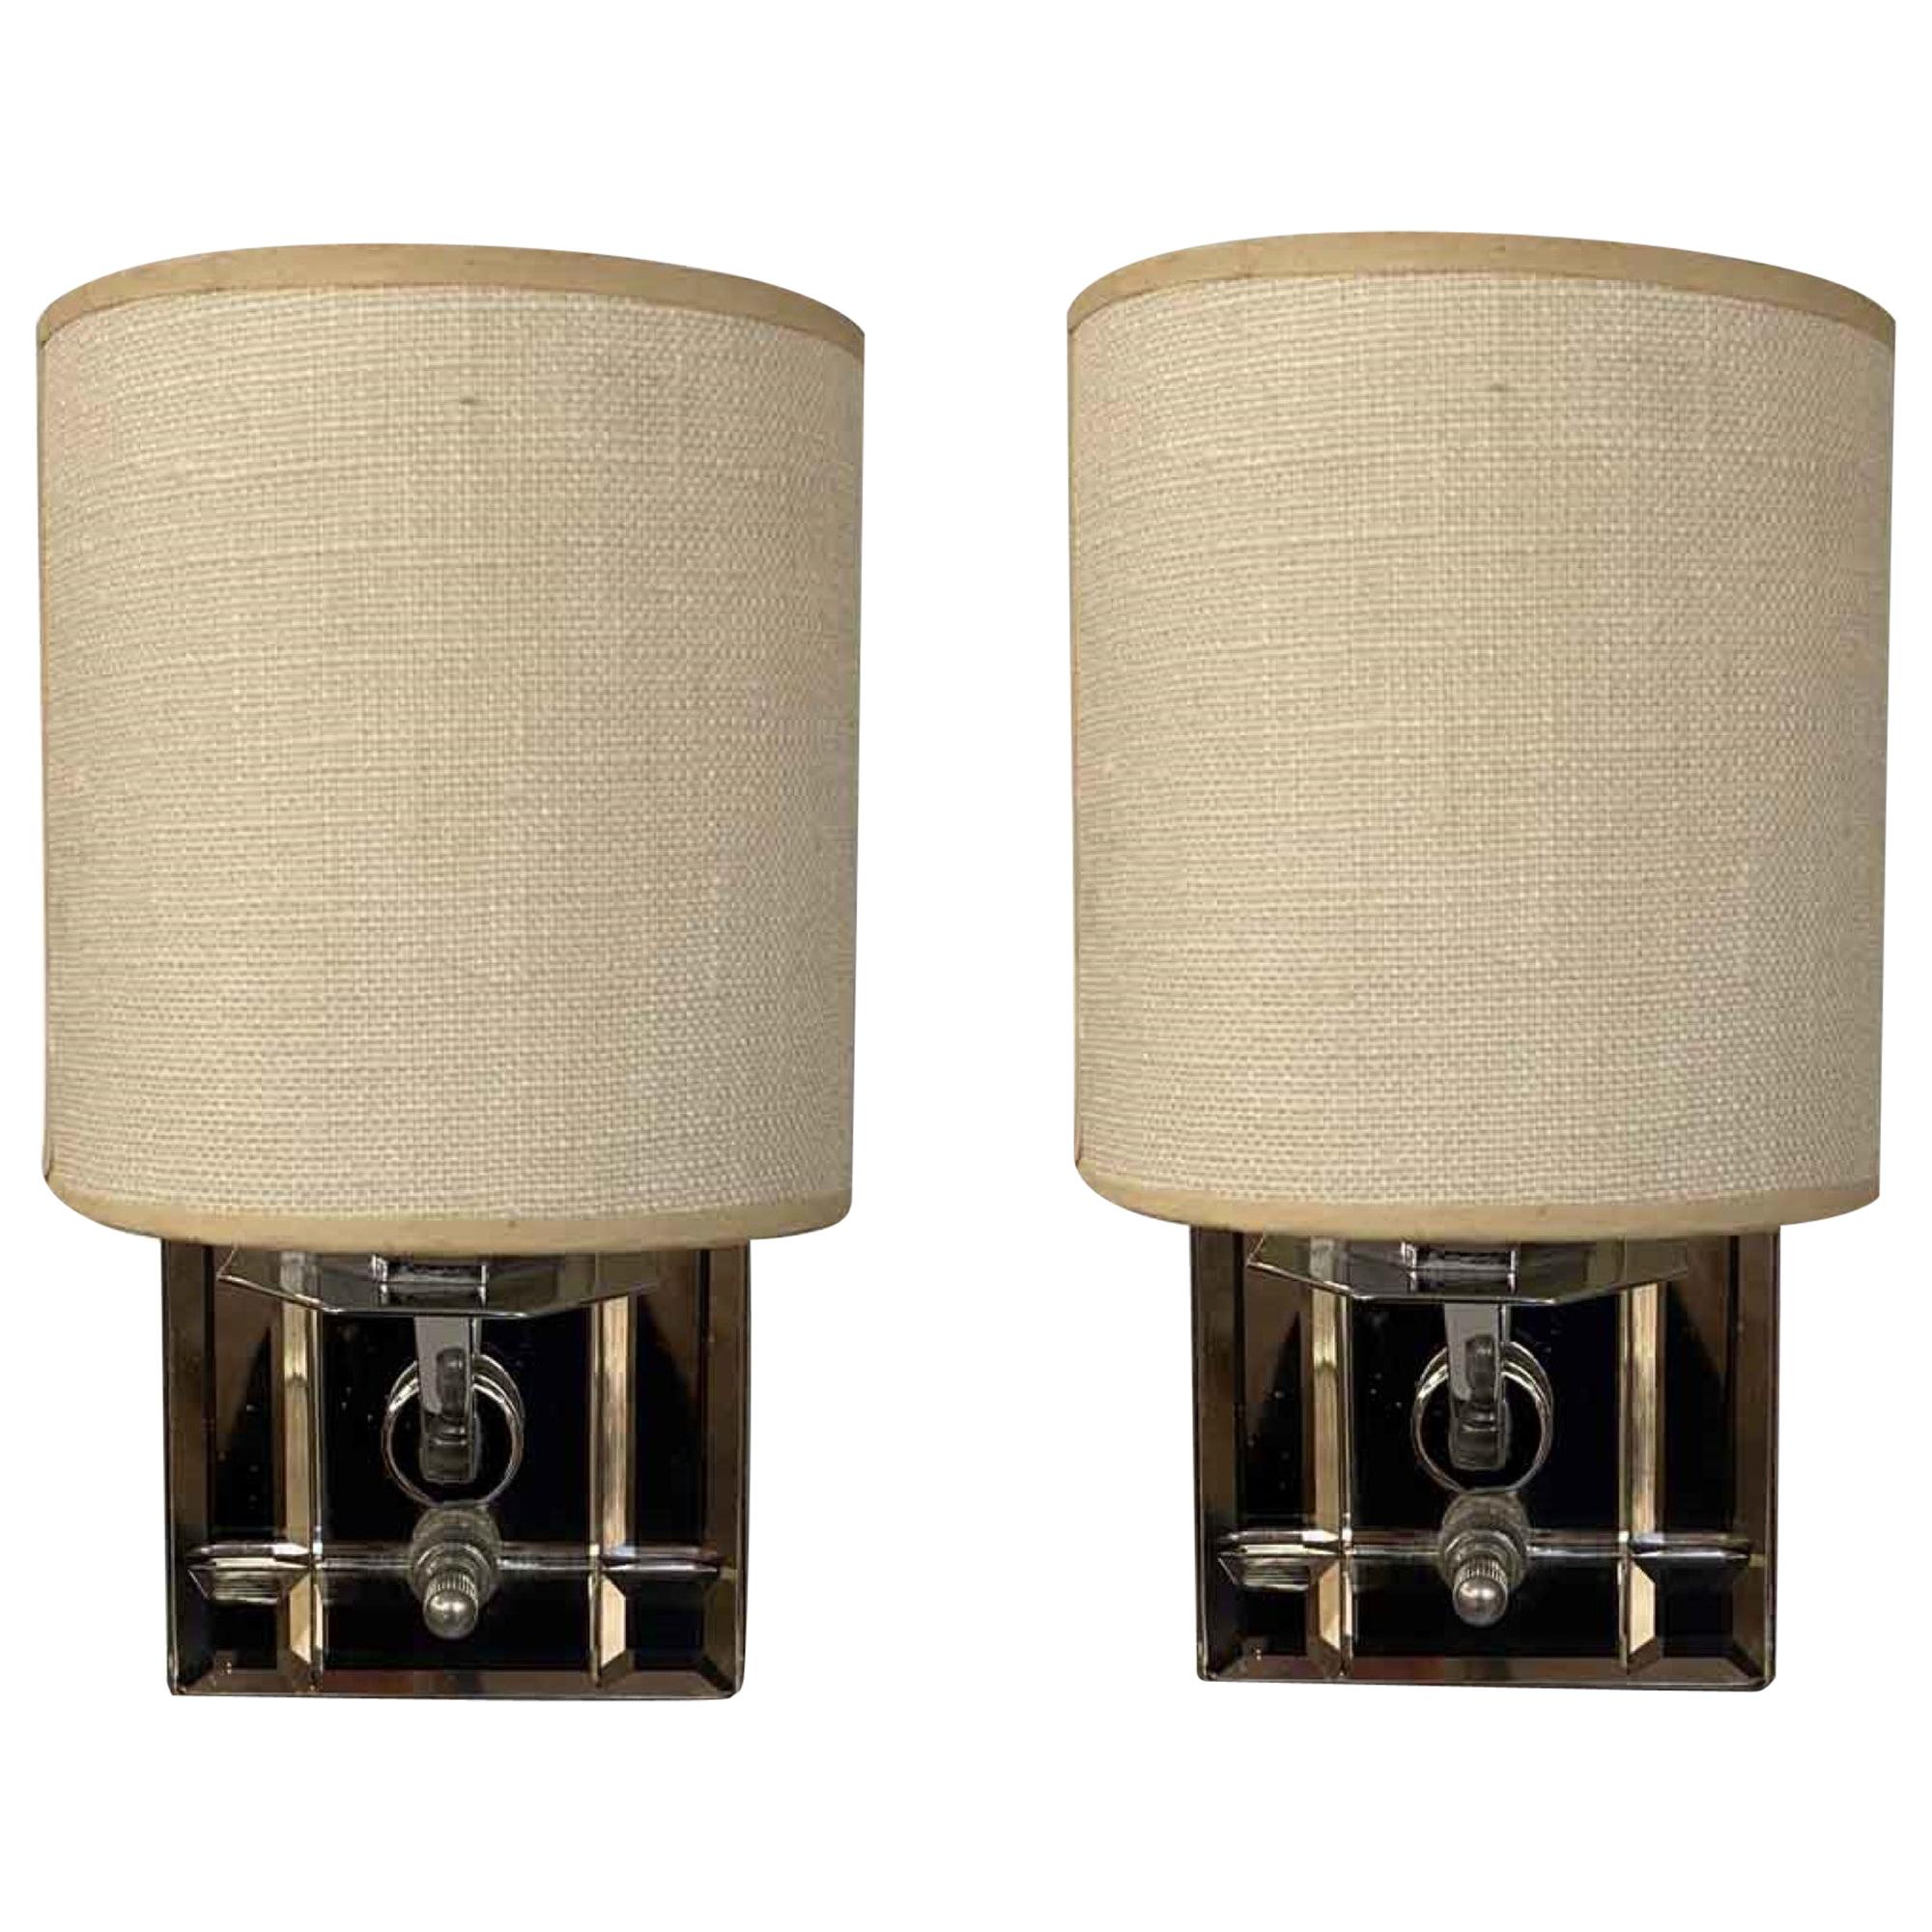 1940s Pair of Sconces with Beveled Edge Mirrors and Done in Polished Nickel